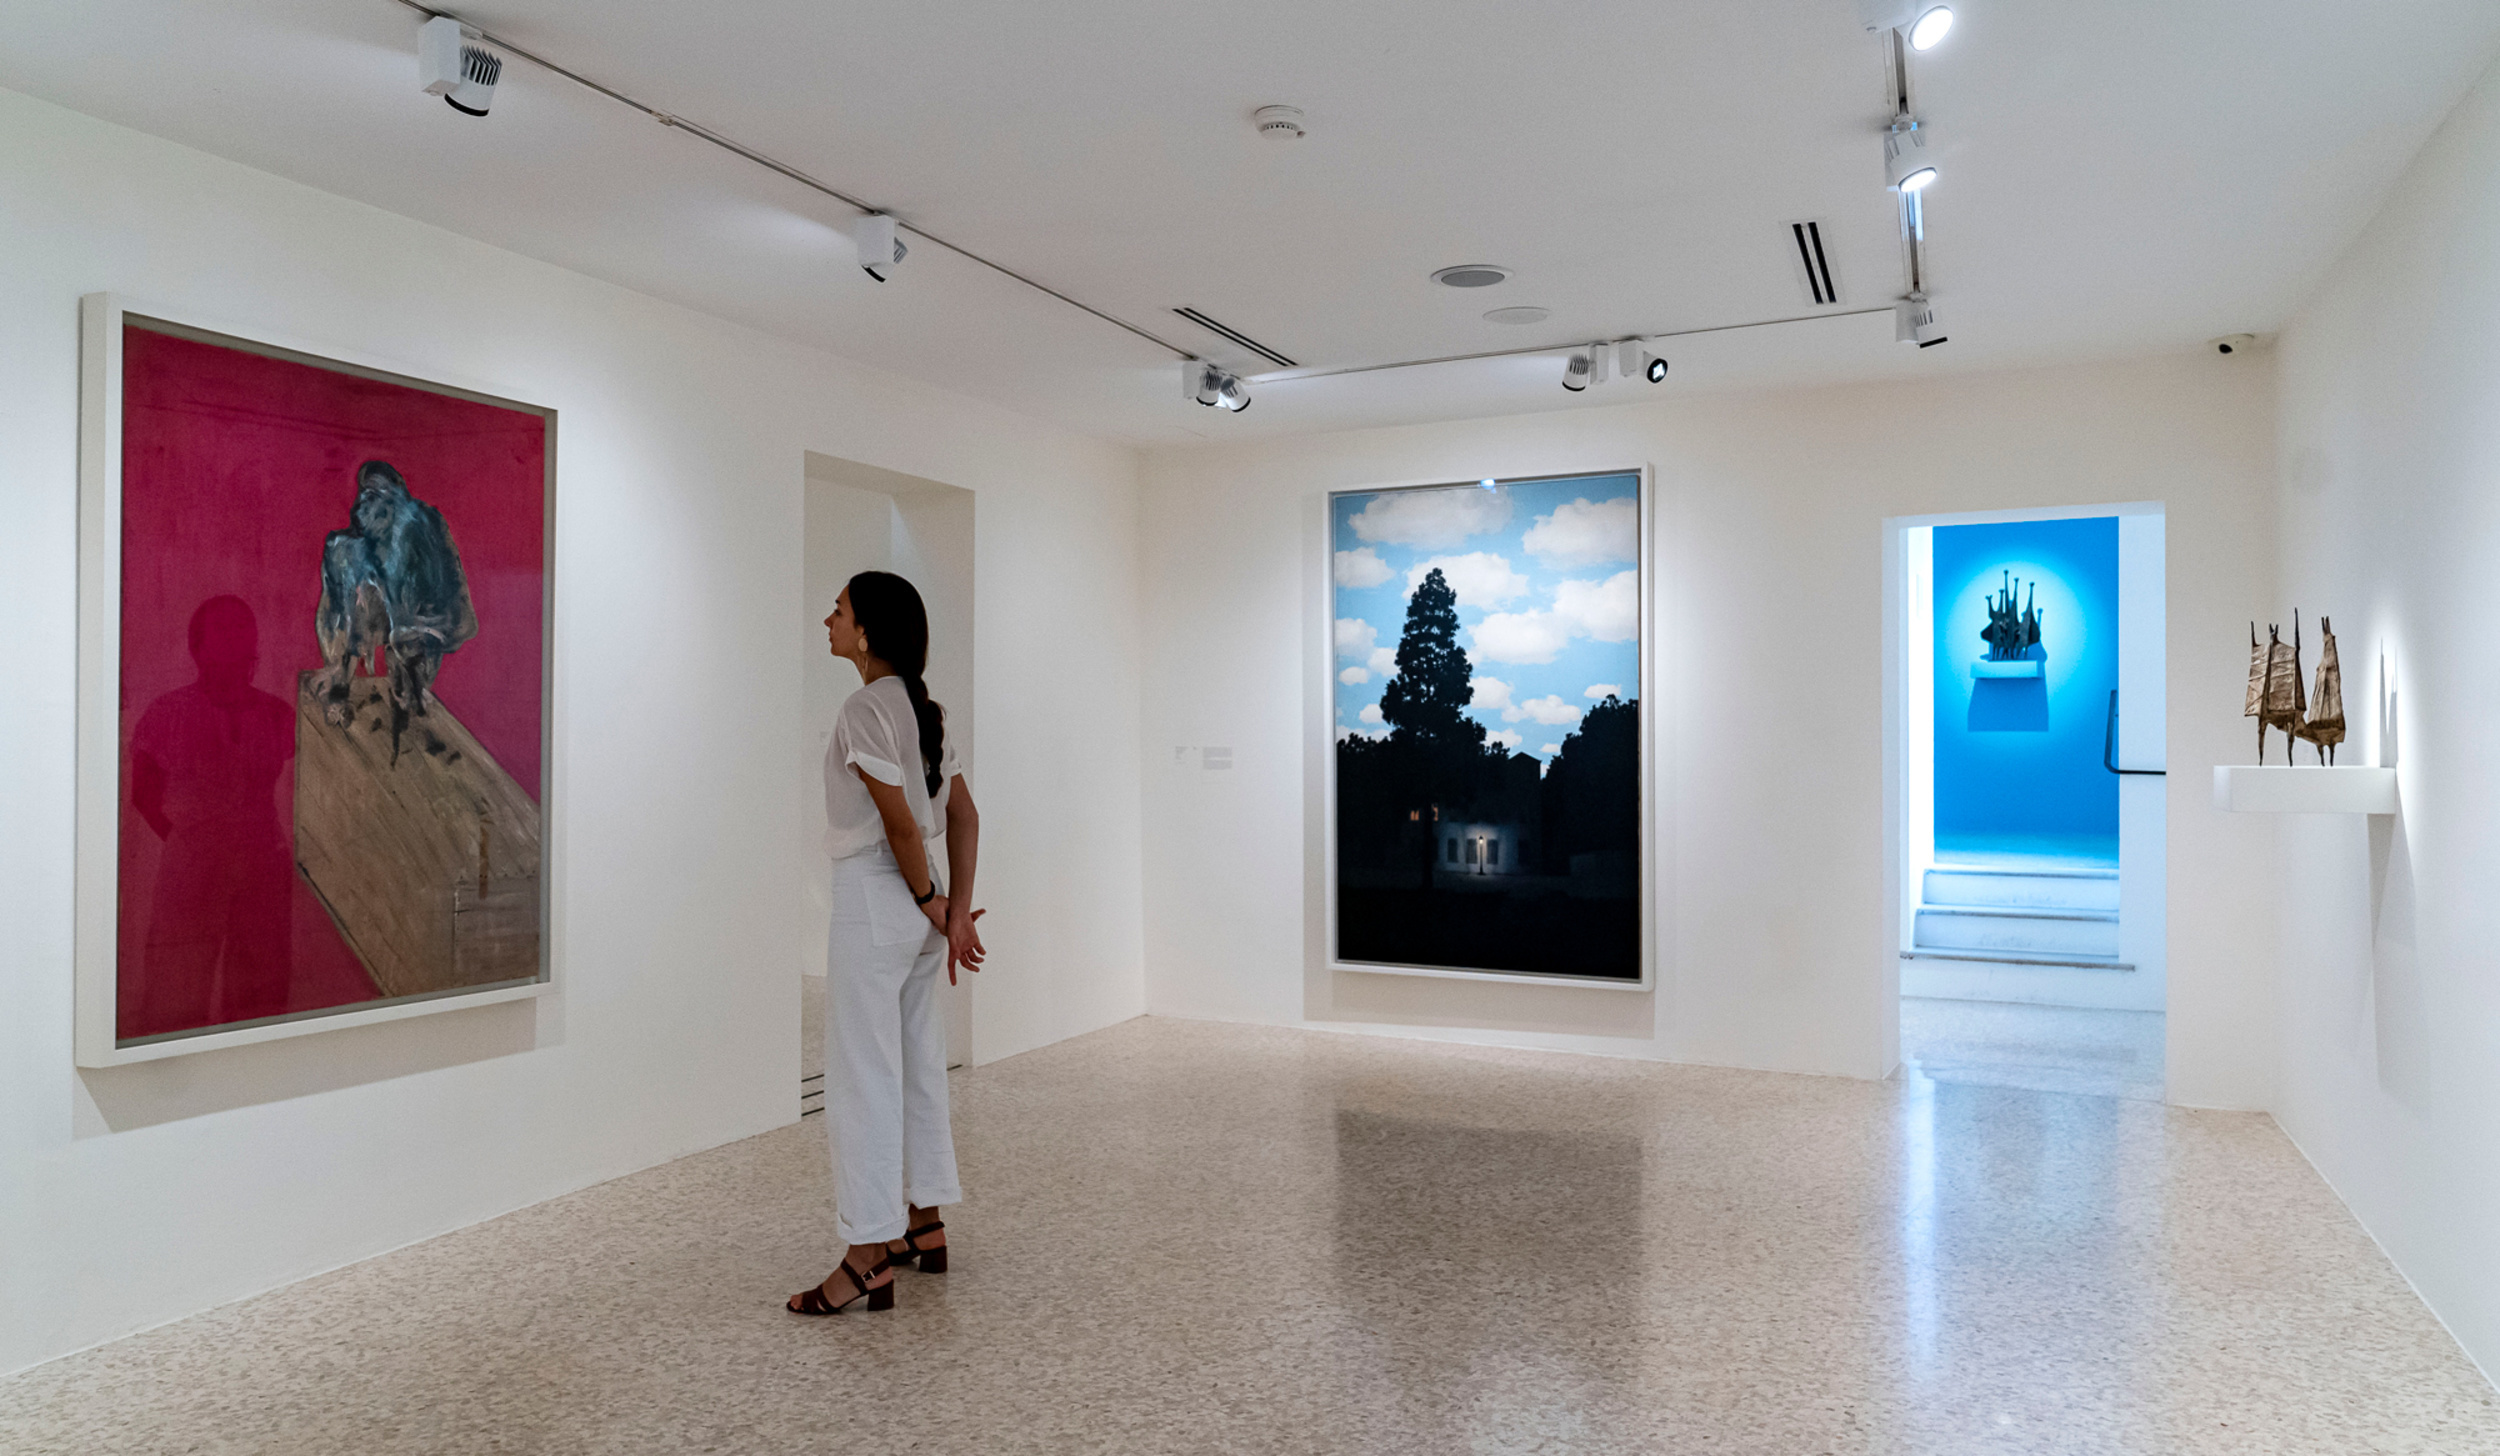 <p>This private collection was once the home of Peggy Guggenheim, who played a big role in the careers of Jackson Pollock, Max Ernst, and Alberto Giacometti. Now, you'll find the walls lined with Picasso, Dali, Mondrian, and Malevich. Plus, Joseph Cornell! </p><p>You may also like: <a href='https://www.yardbarker.com/lifestyle/articles/start_your_meal_off_right_12_delicious_cookilicious_appetizer_recipes_010124/s1__34210706'>Start your meal off right: 12 delicious Cookilicious appetizer recipes</a></p>